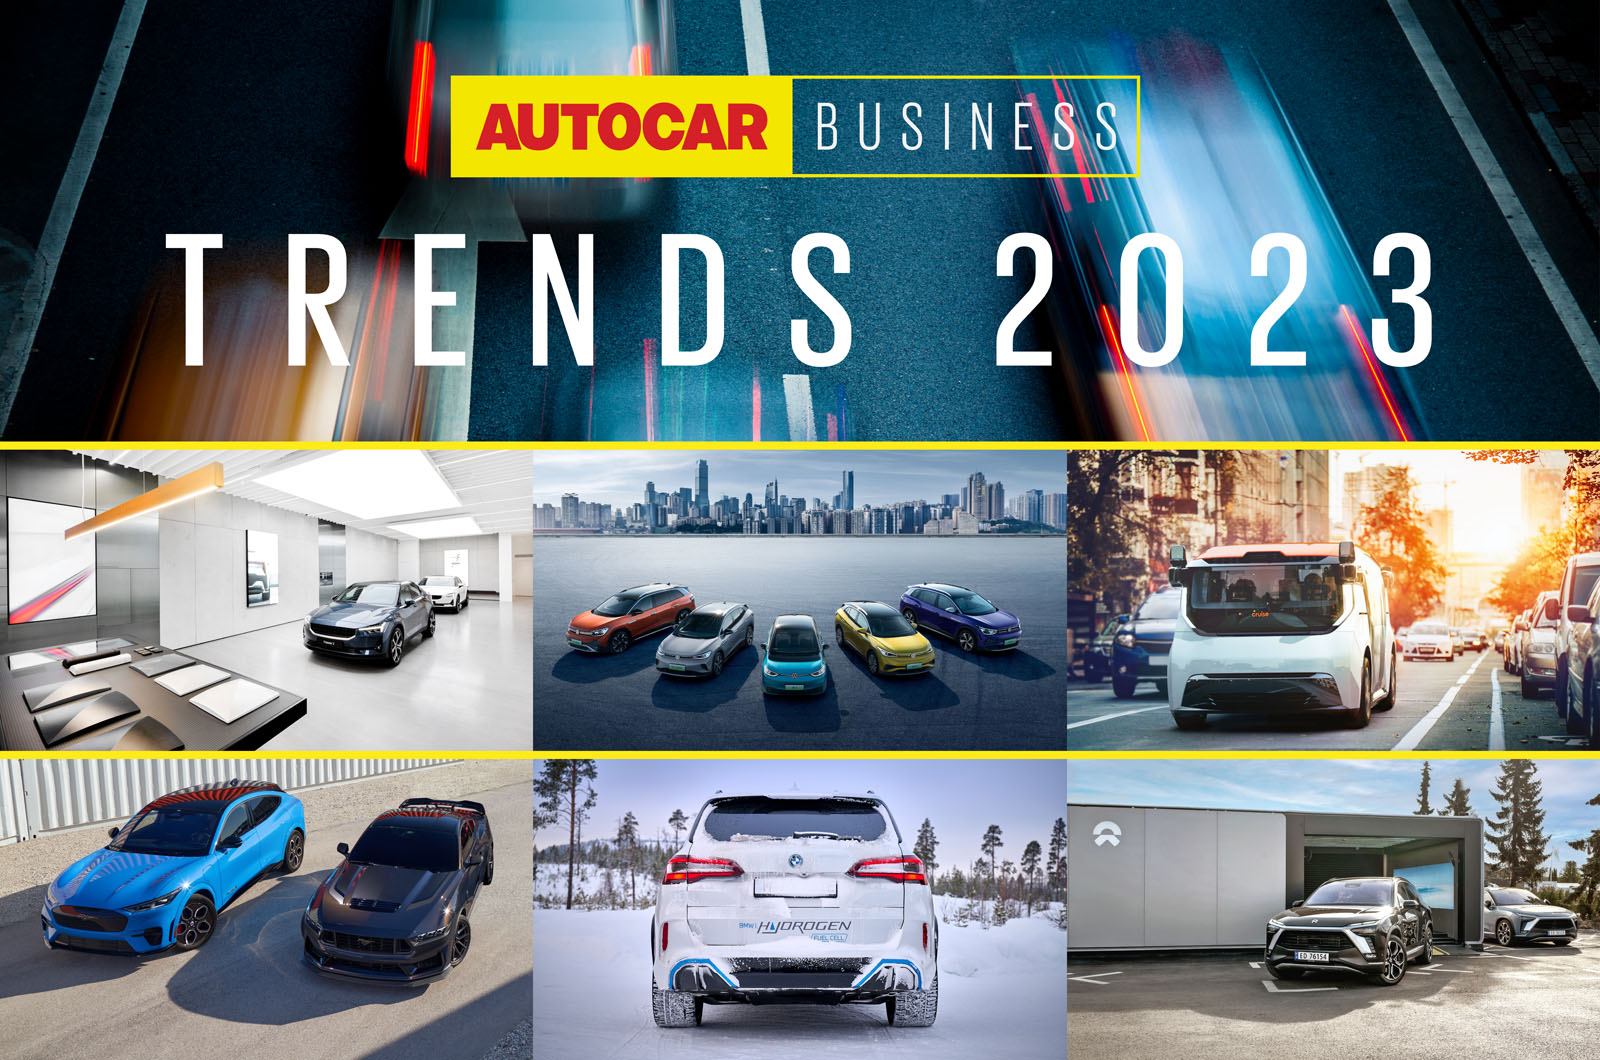 Autocar Business names top 10 trends for 2023: download now